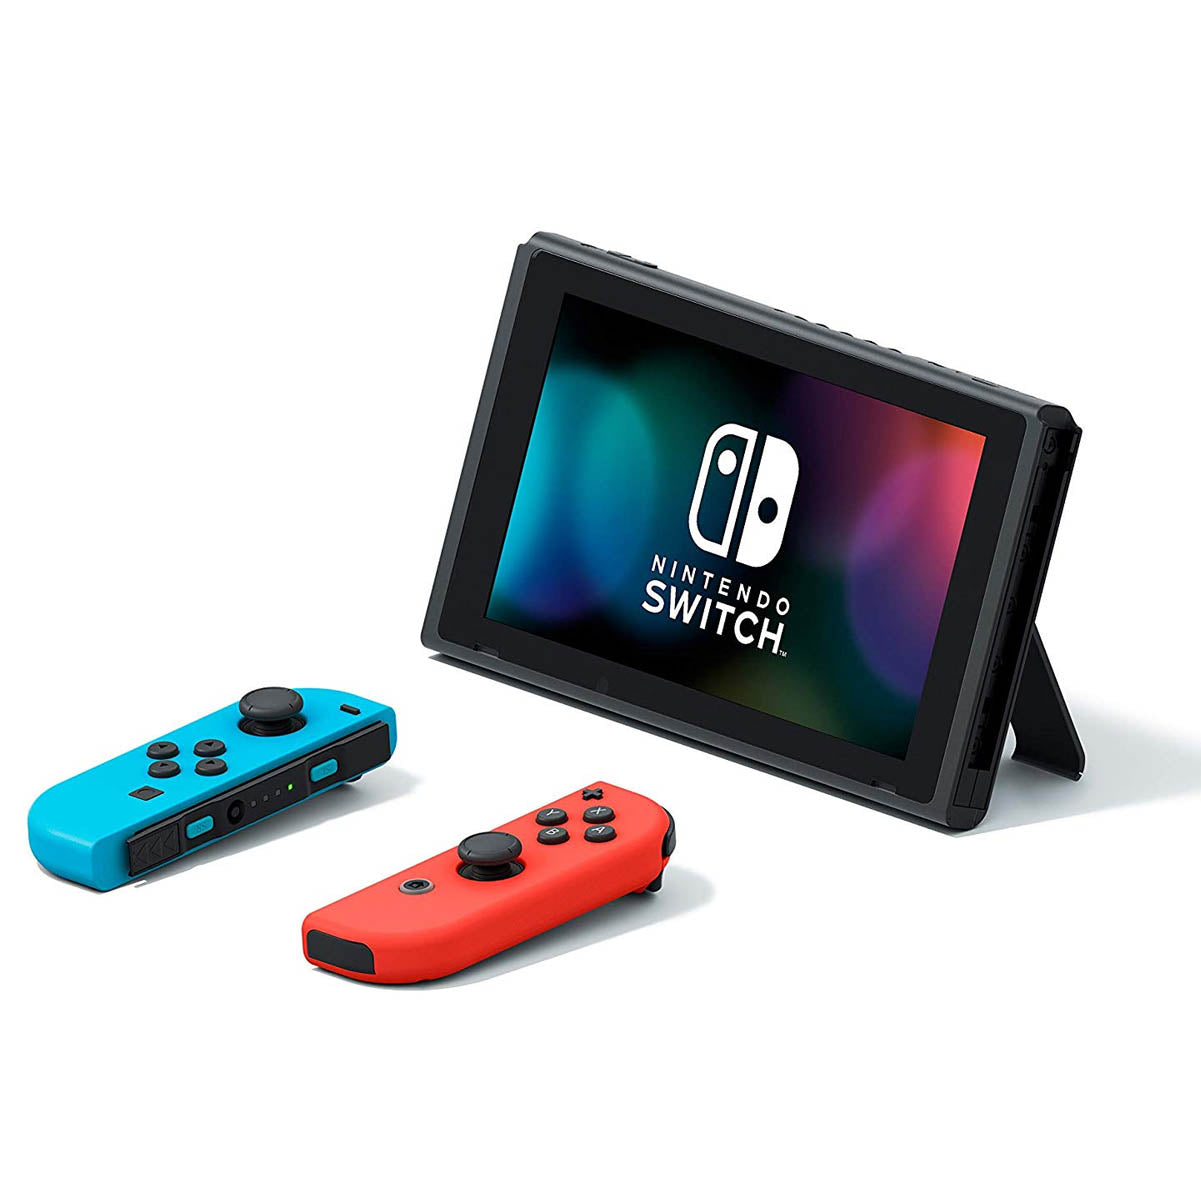 Nintendo Switch Gaming Console with Extended Battery - Neon Blue/Red Joy-Con